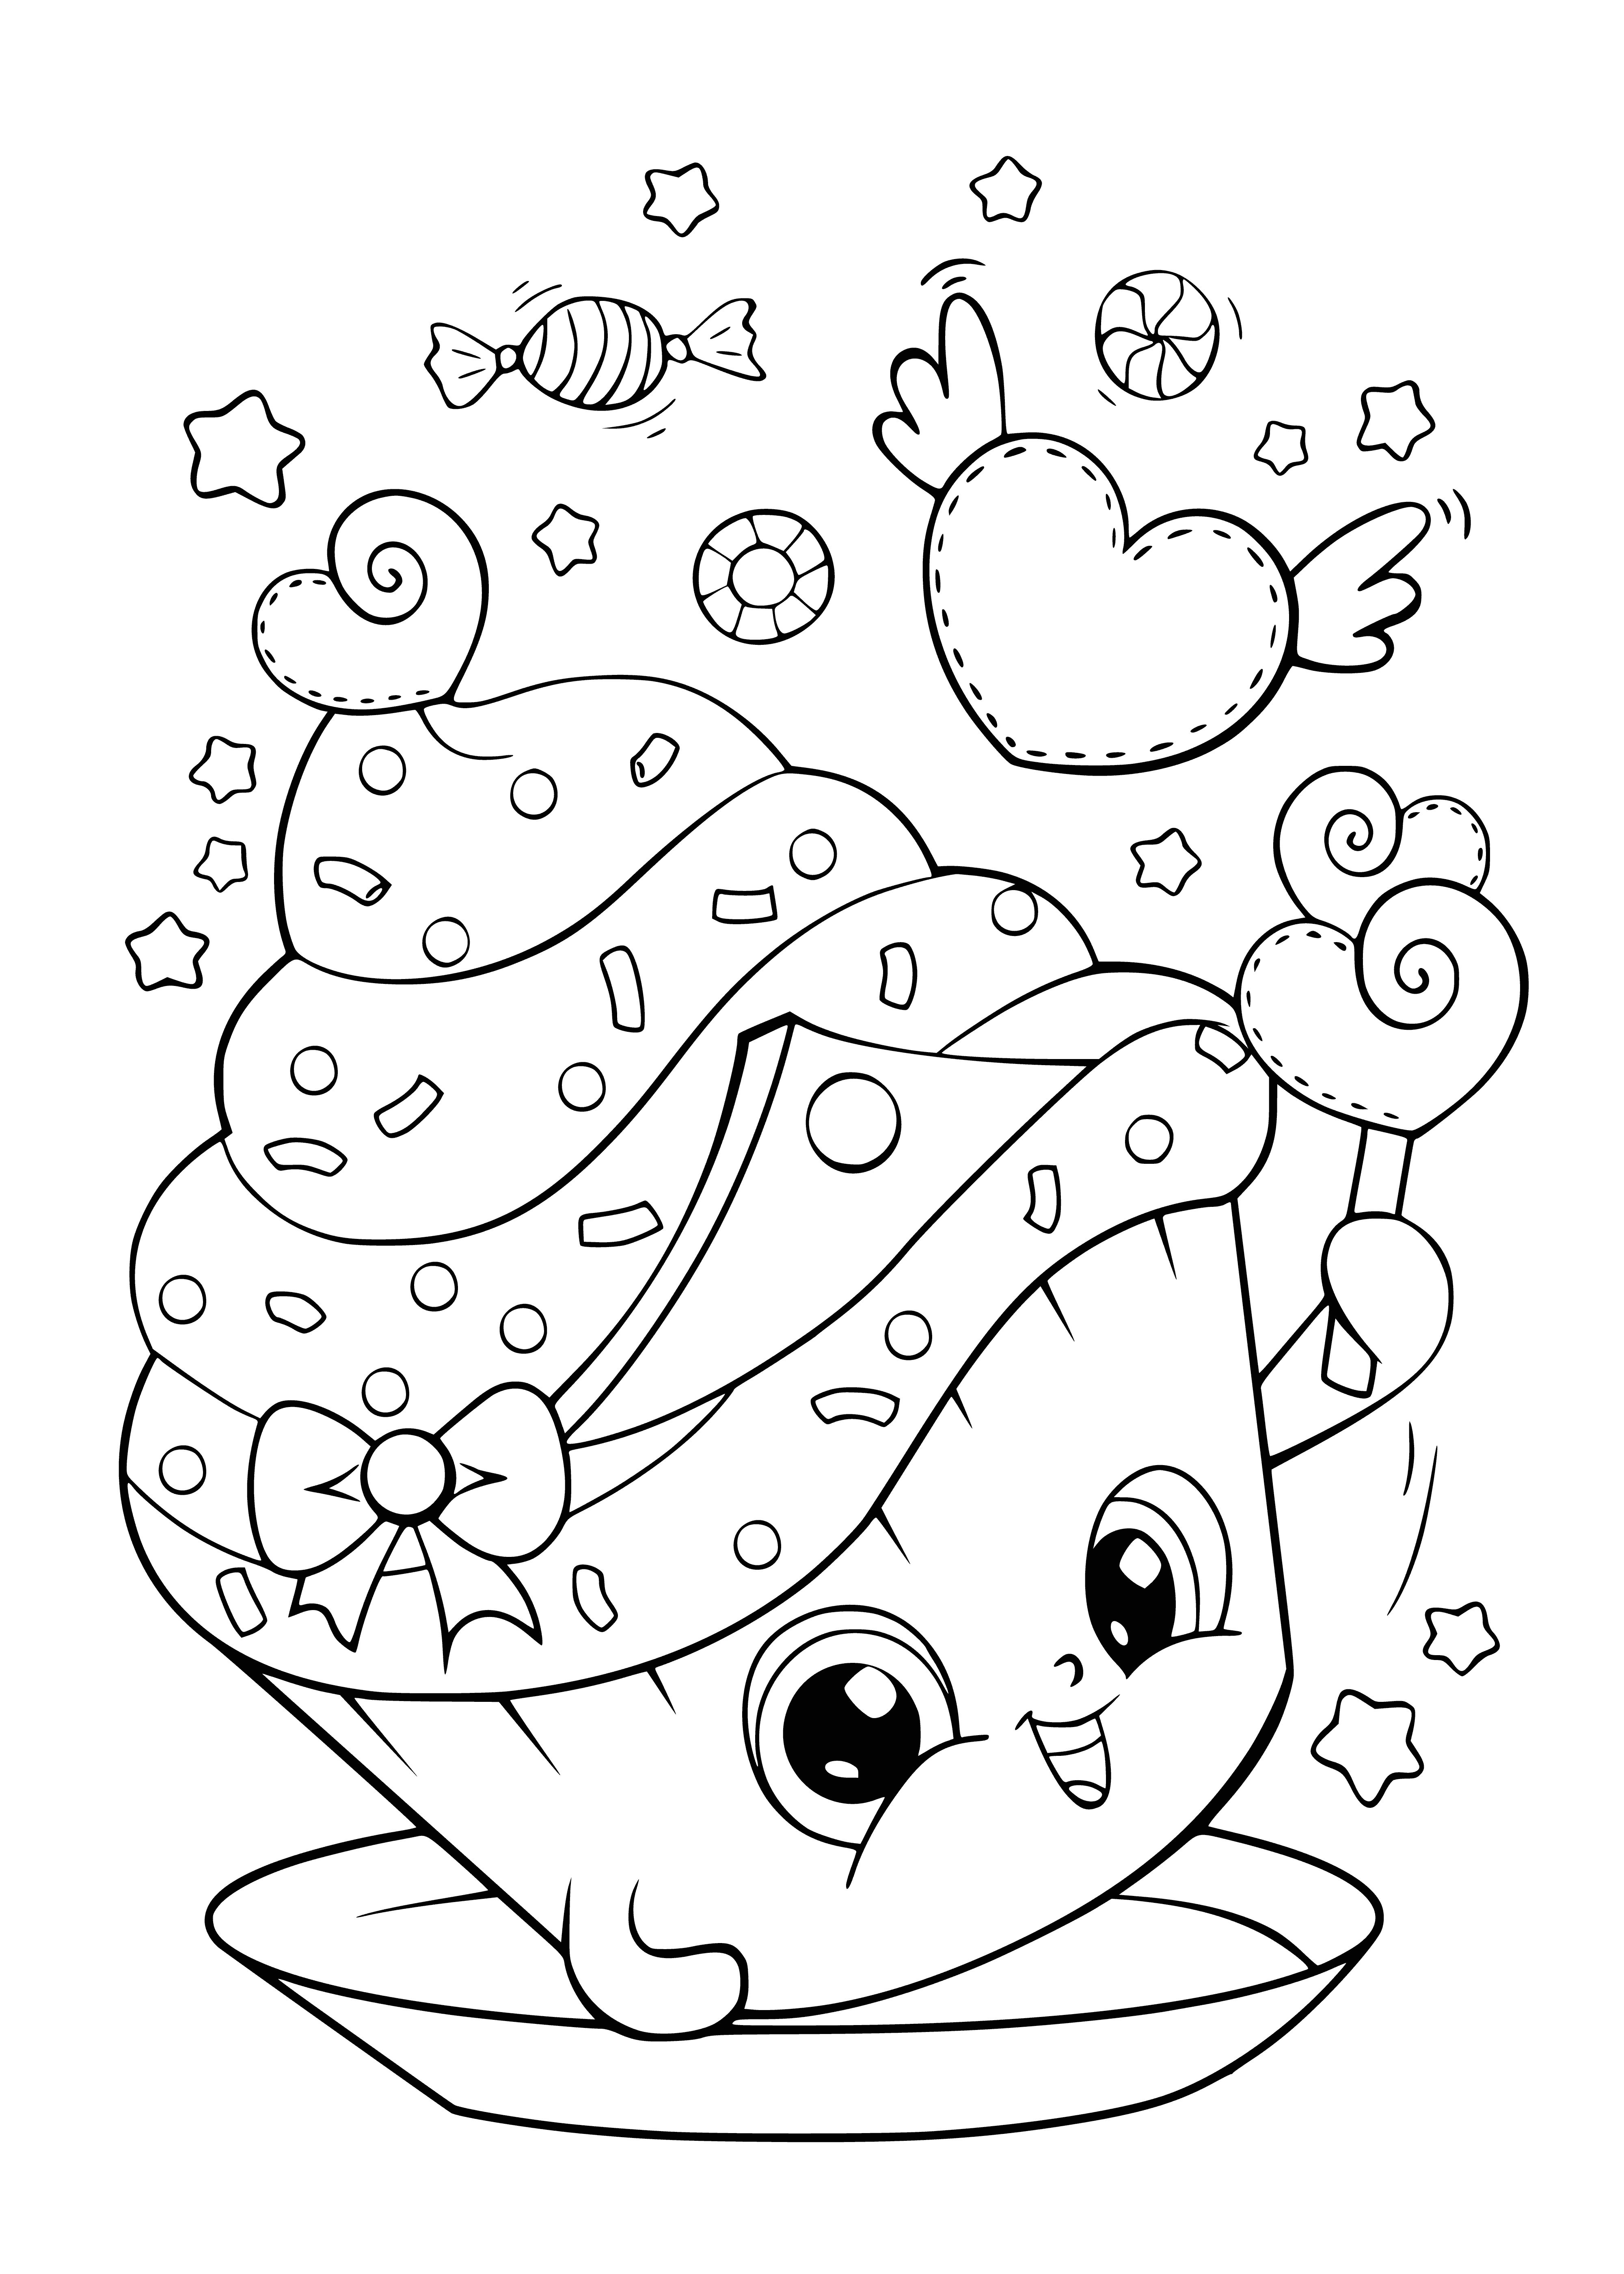 coloring page: Adorable kawaii cake drawn with swirls & hearts, perfect for coloring in & anyone who loves all things cute!